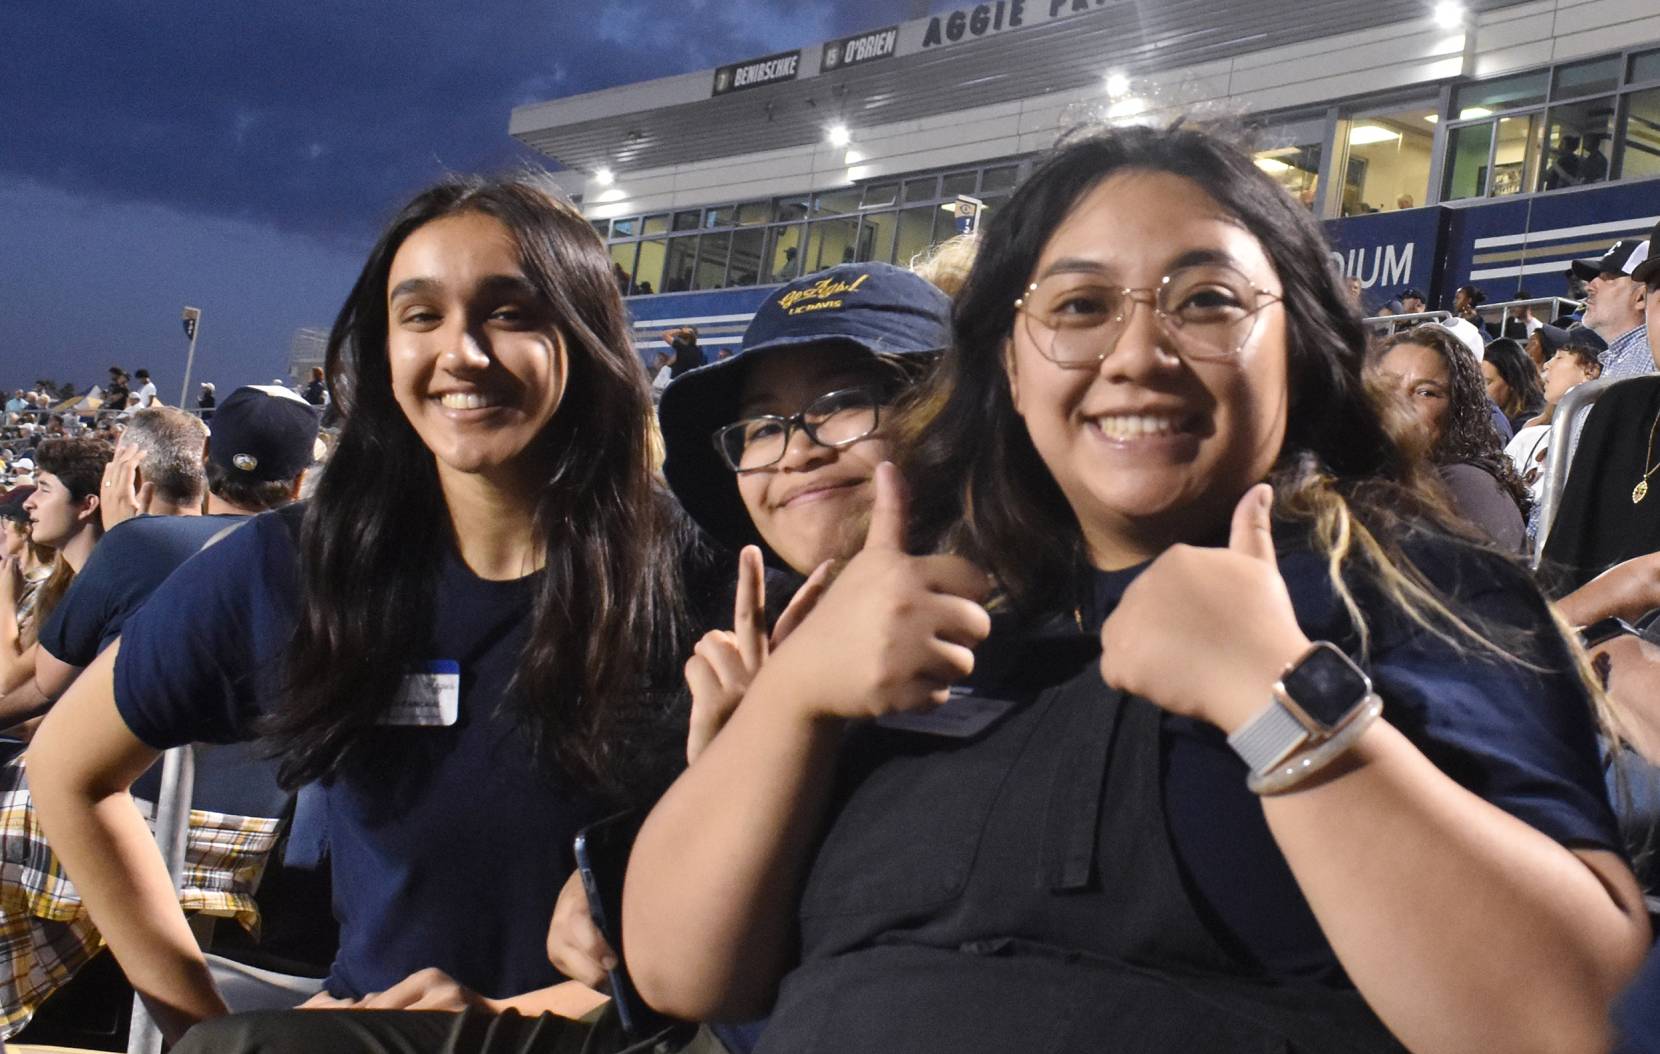 Three students pose for a photo at UC Berkeley's stadium at night, giving thumbs up